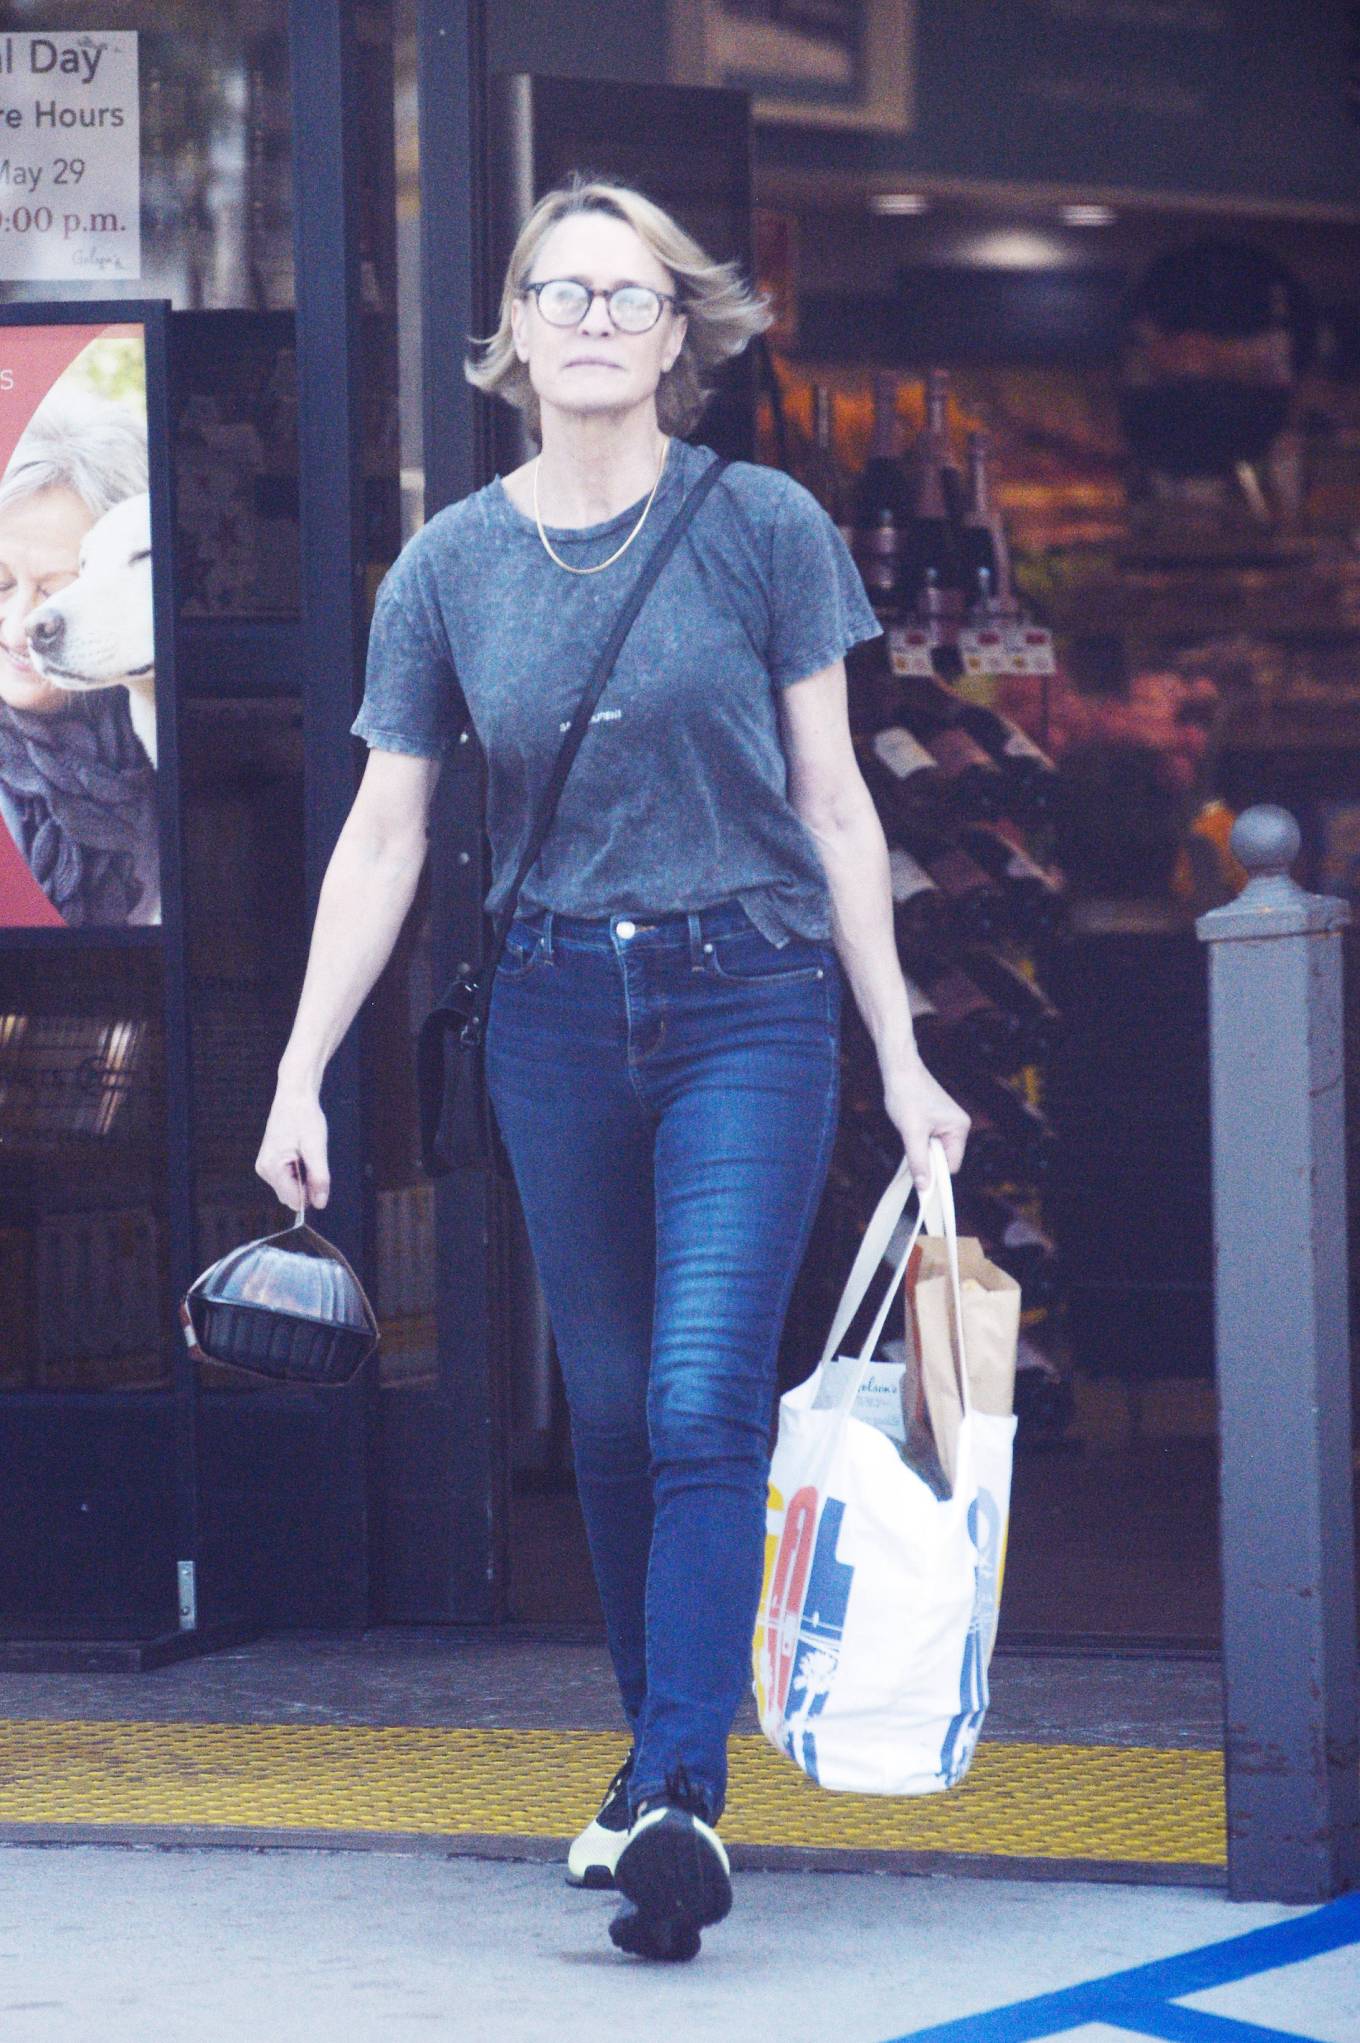 Robin Wright - Is spotted while shopping in Los Angeles